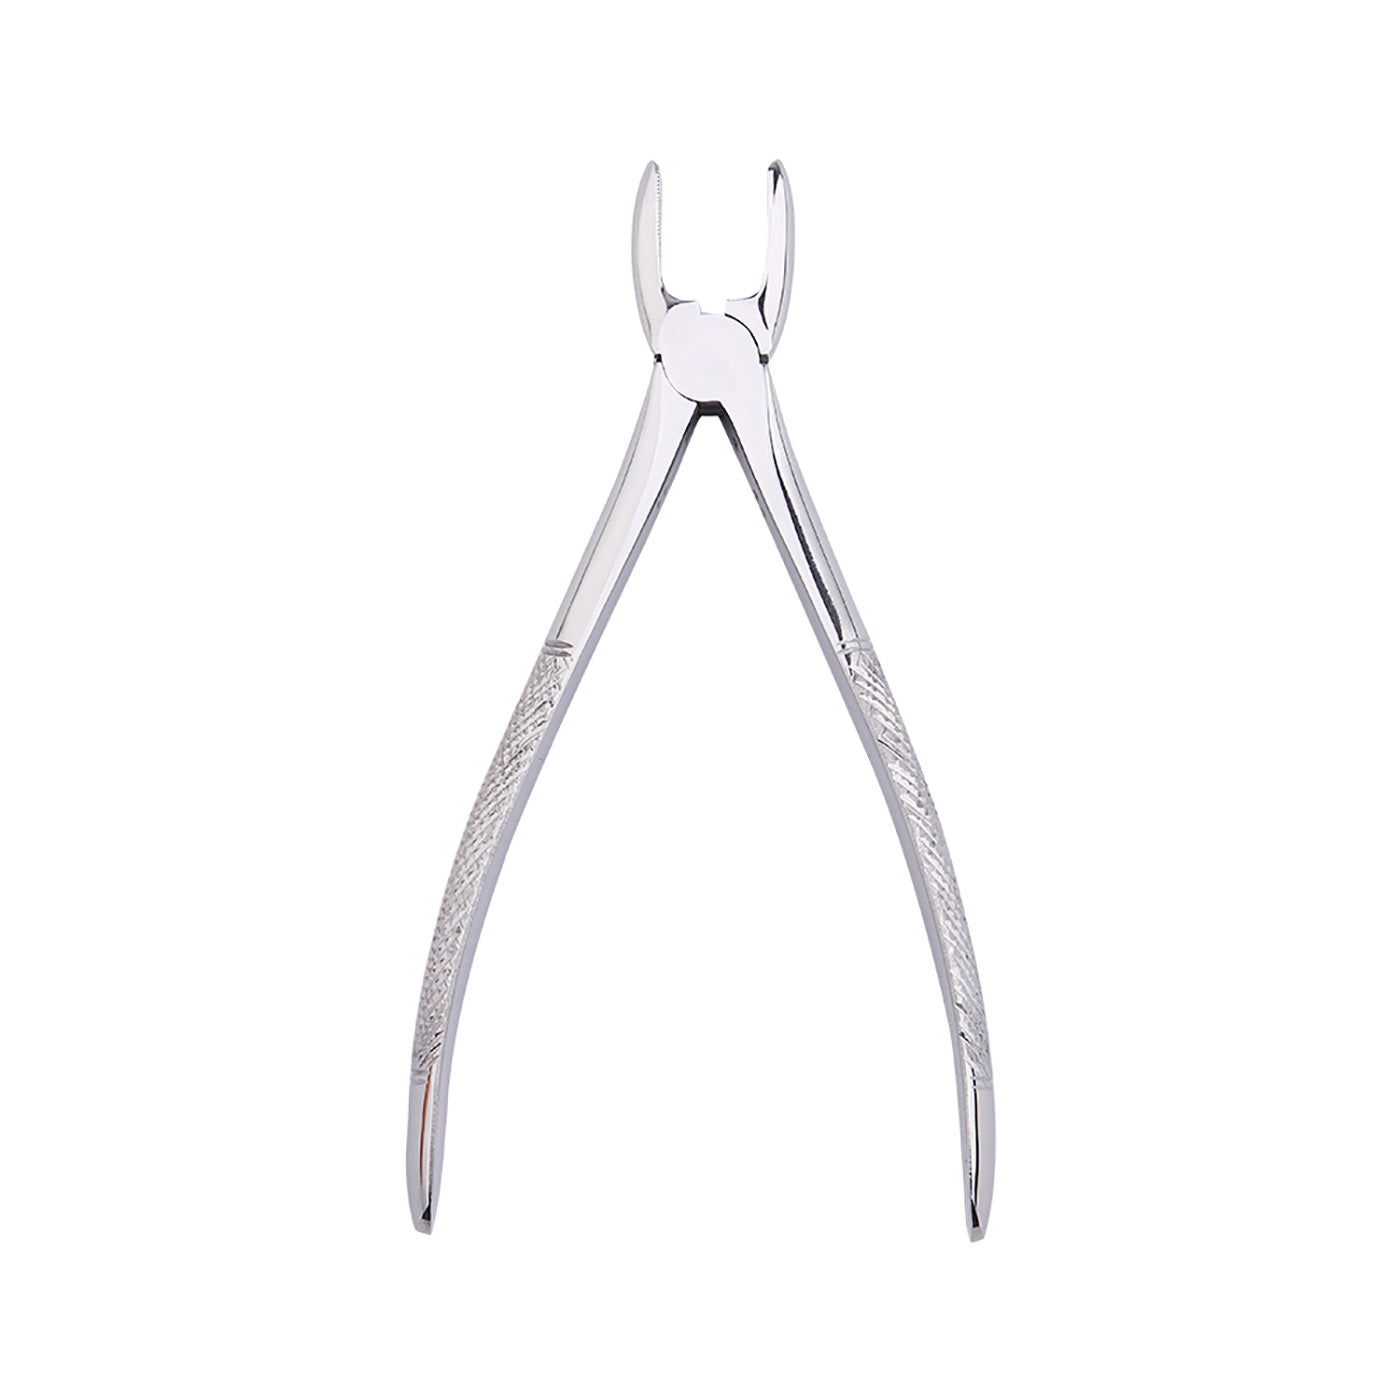 Dental Surgical Tooth Extraction Forceps Pliers for Adults 10pcs/Set - azdentall.com